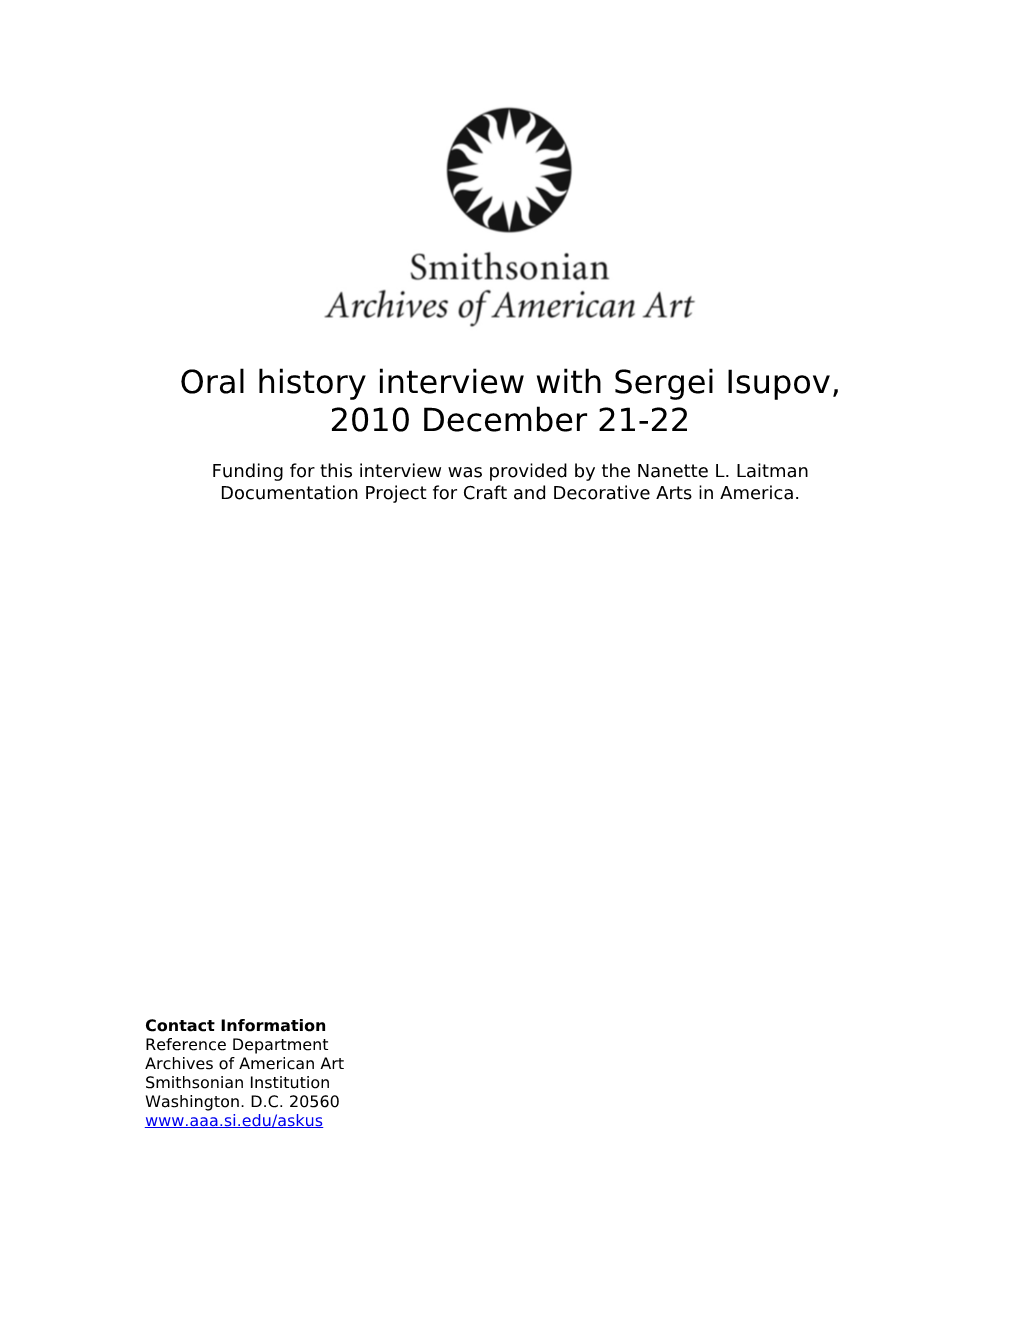 Oral History Interview with Sergei Isupov, 2010 December 21-22